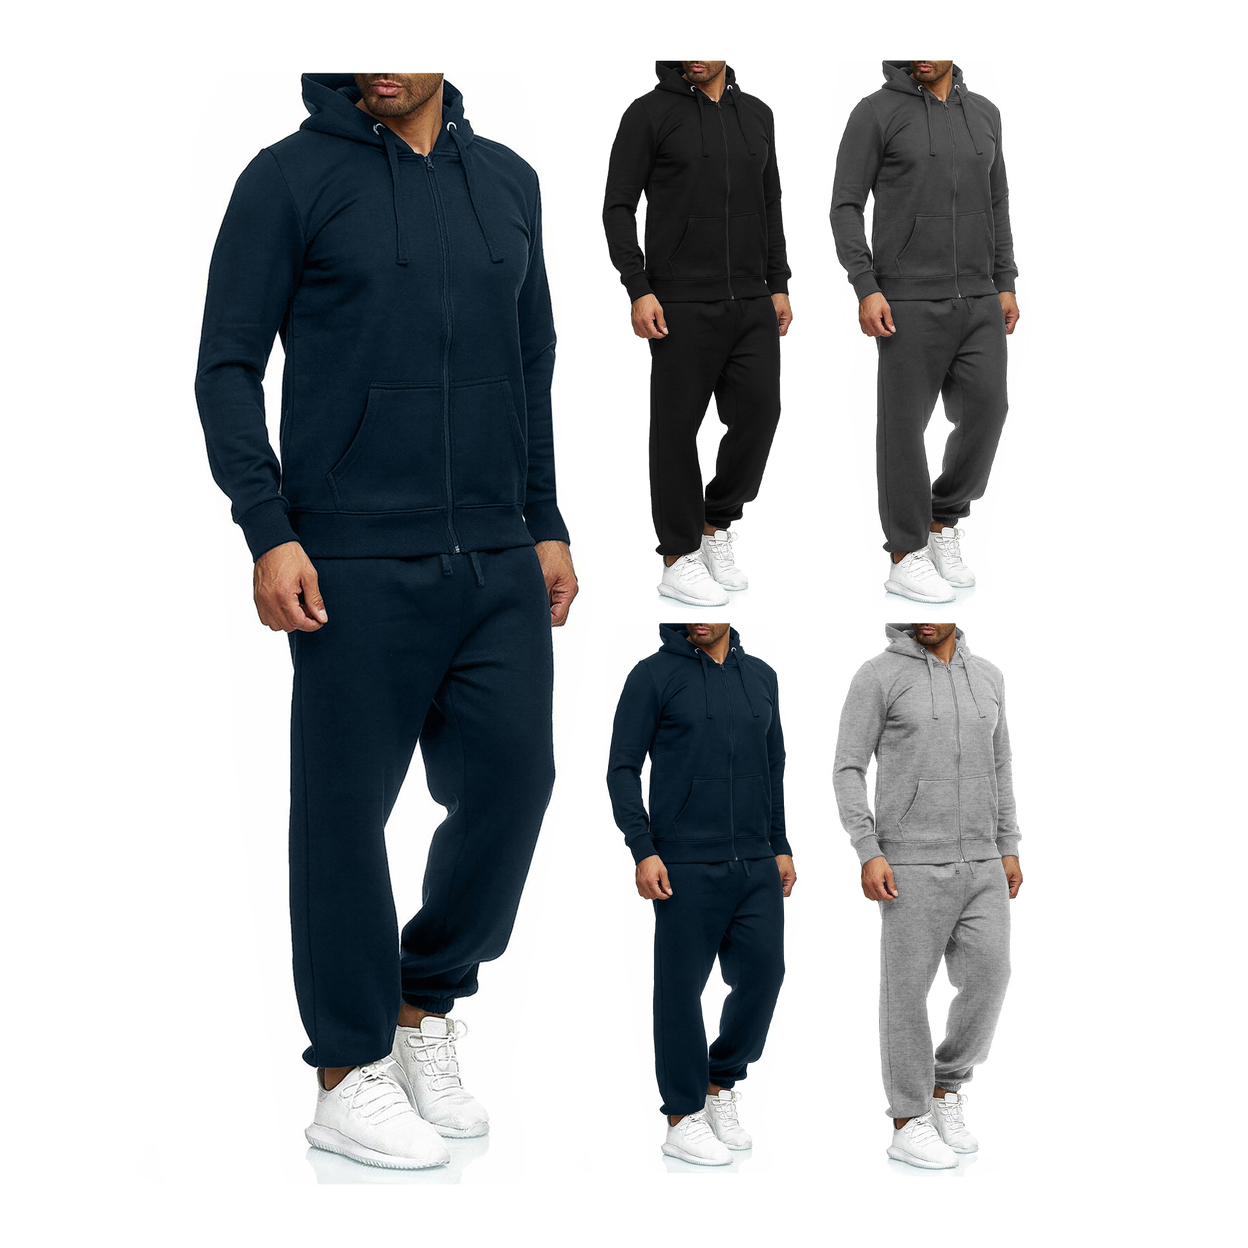 Men's Casual Big & Tall Athletic Active Winter Warm Fleece Lined Full Zip Tracksuit Jogger Set - Grey, Large